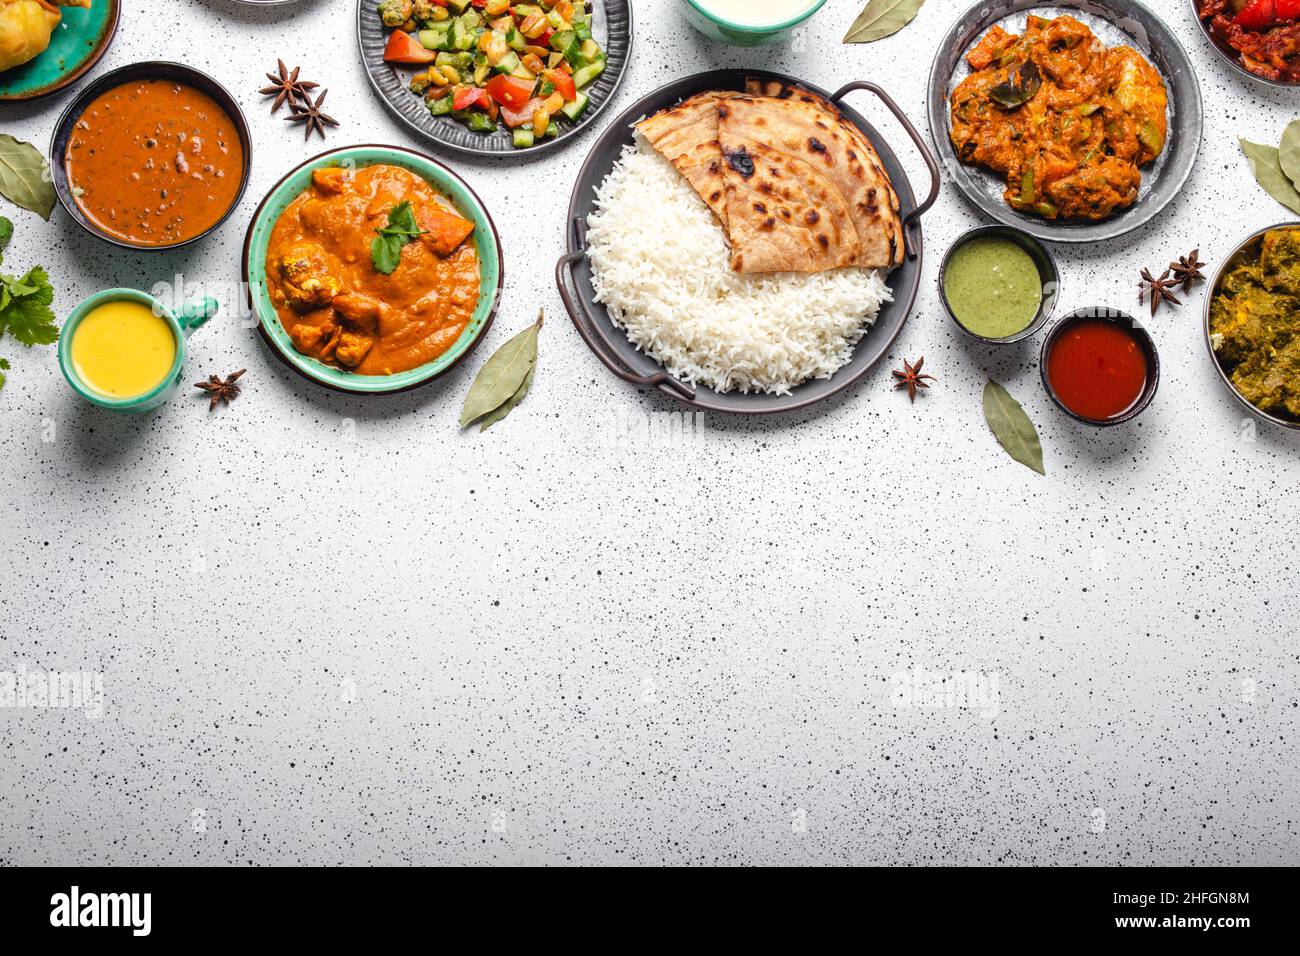 Indian ethnic food buffet on white concrete table top view copy space Stock Photo